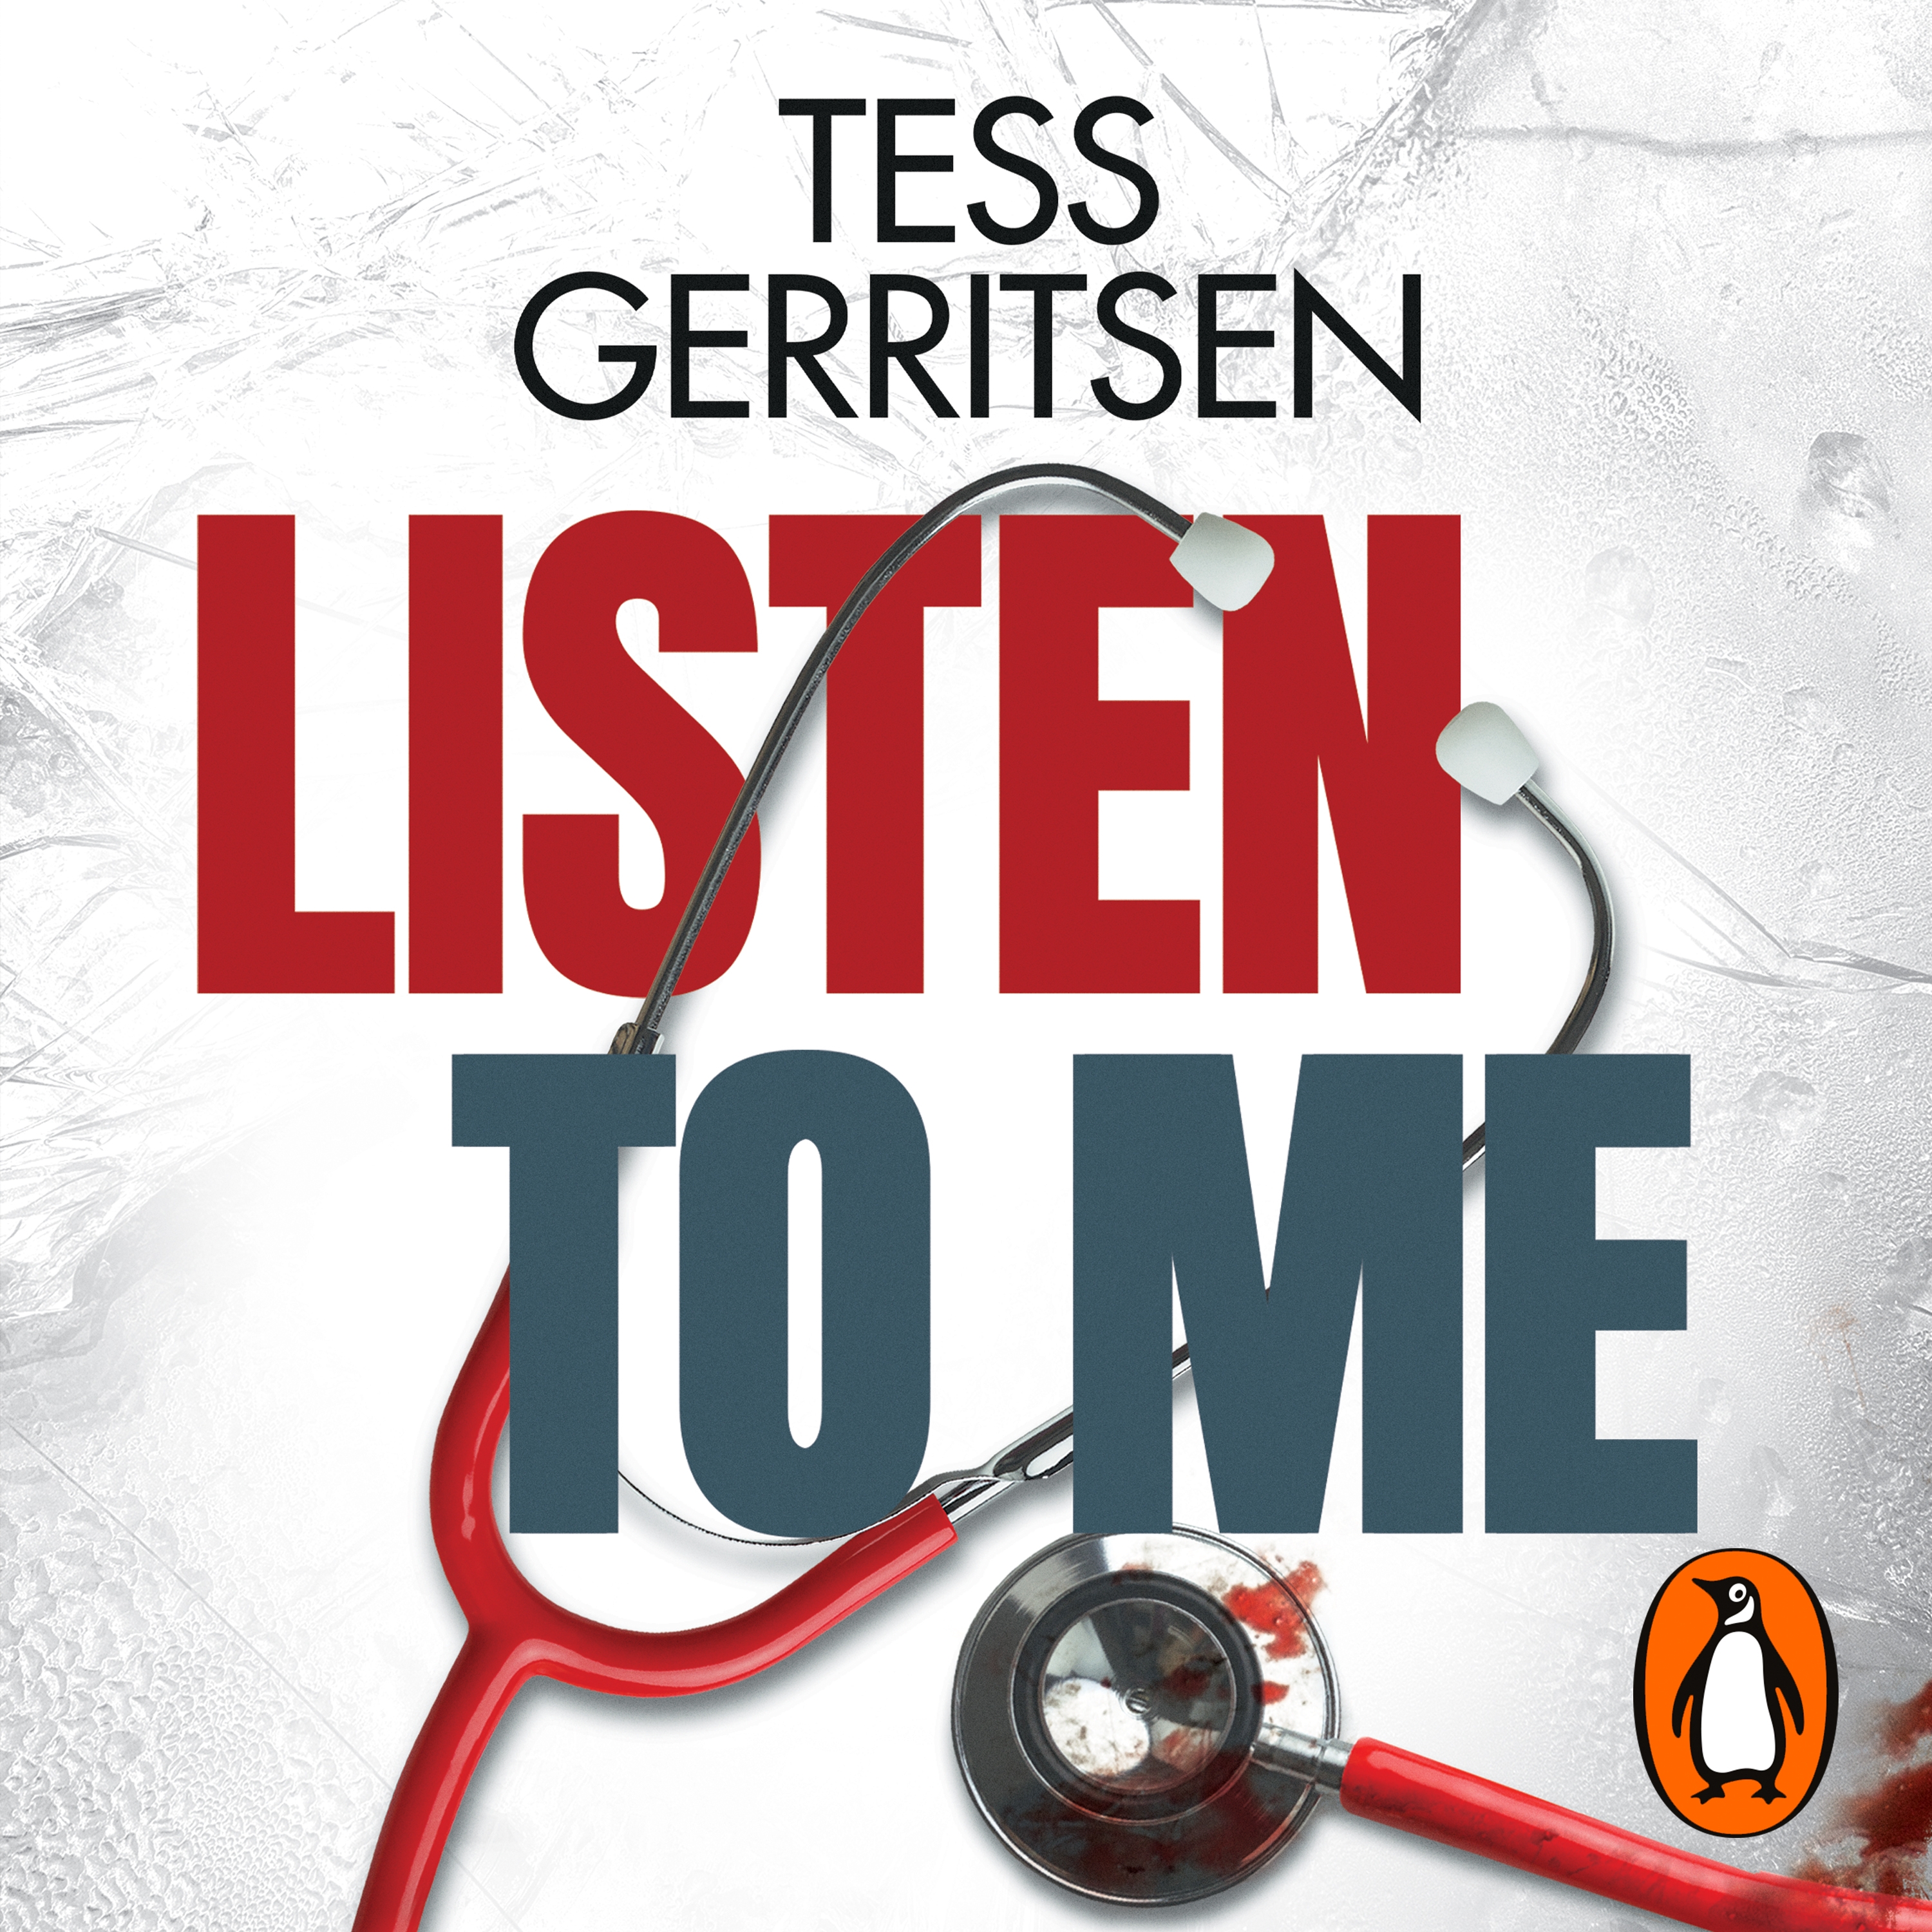 Cover of Listen to Me by Tess Gerritsen. A red stethoscope with blood stains lies across a white background. The author's name is in black at the top, and the title is stacked in large red and grey letters across most of the cover.